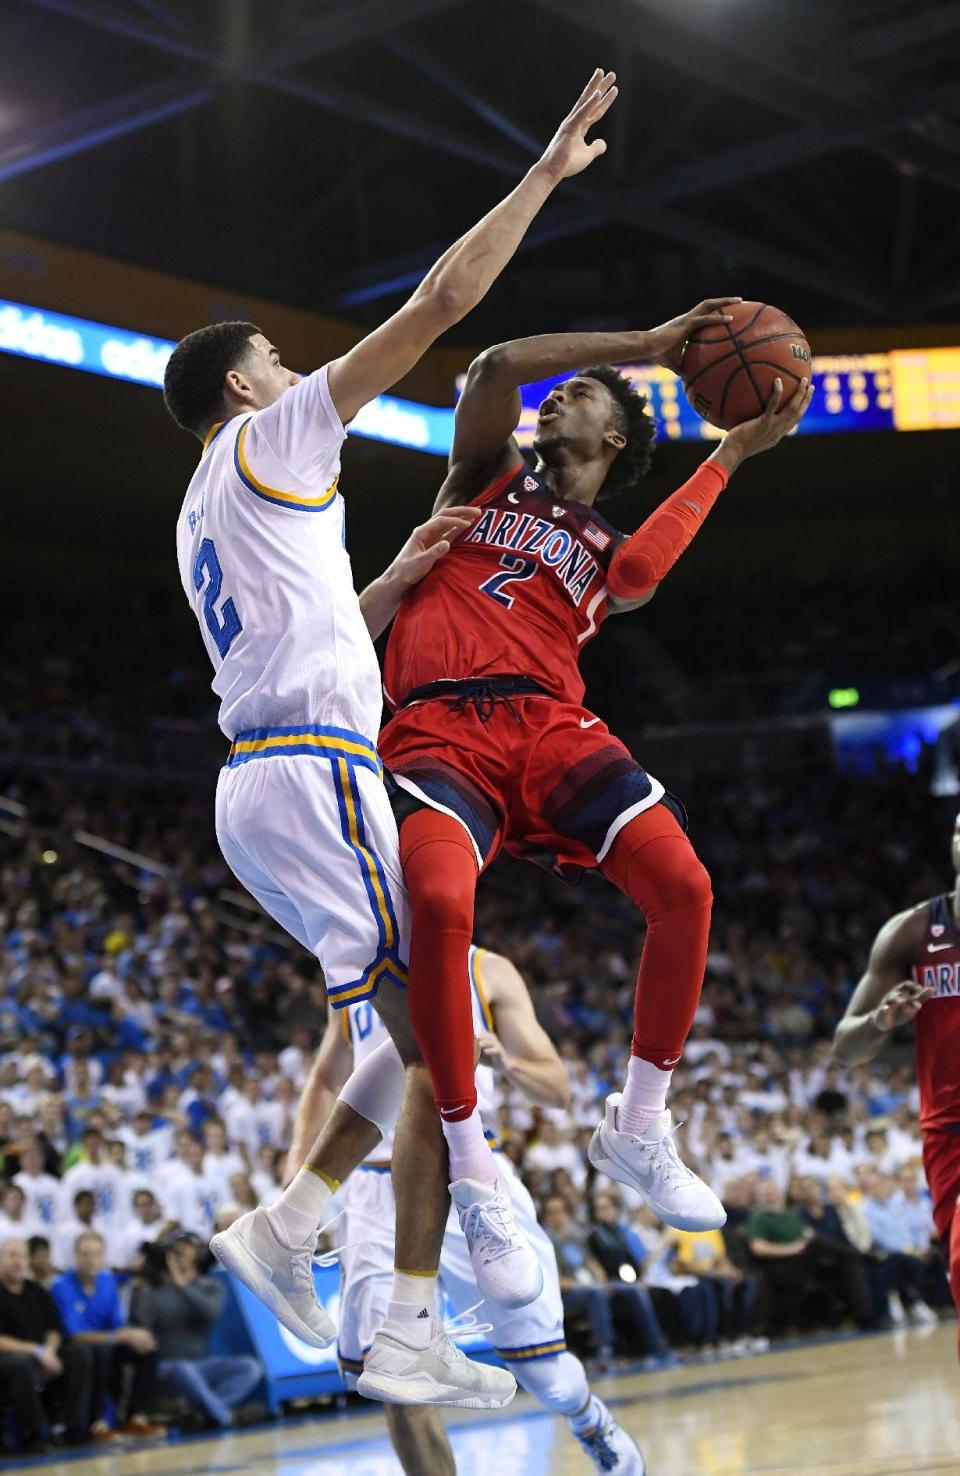 Arizona guard Kobi Simmons, right, shoots as UCLA guard Lonzo Ball defends during the first half of an NCAA college basketball game, Saturday, Jan. 21, 2017, in Los Angeles. (AP Photo/Mark J. Terrill)